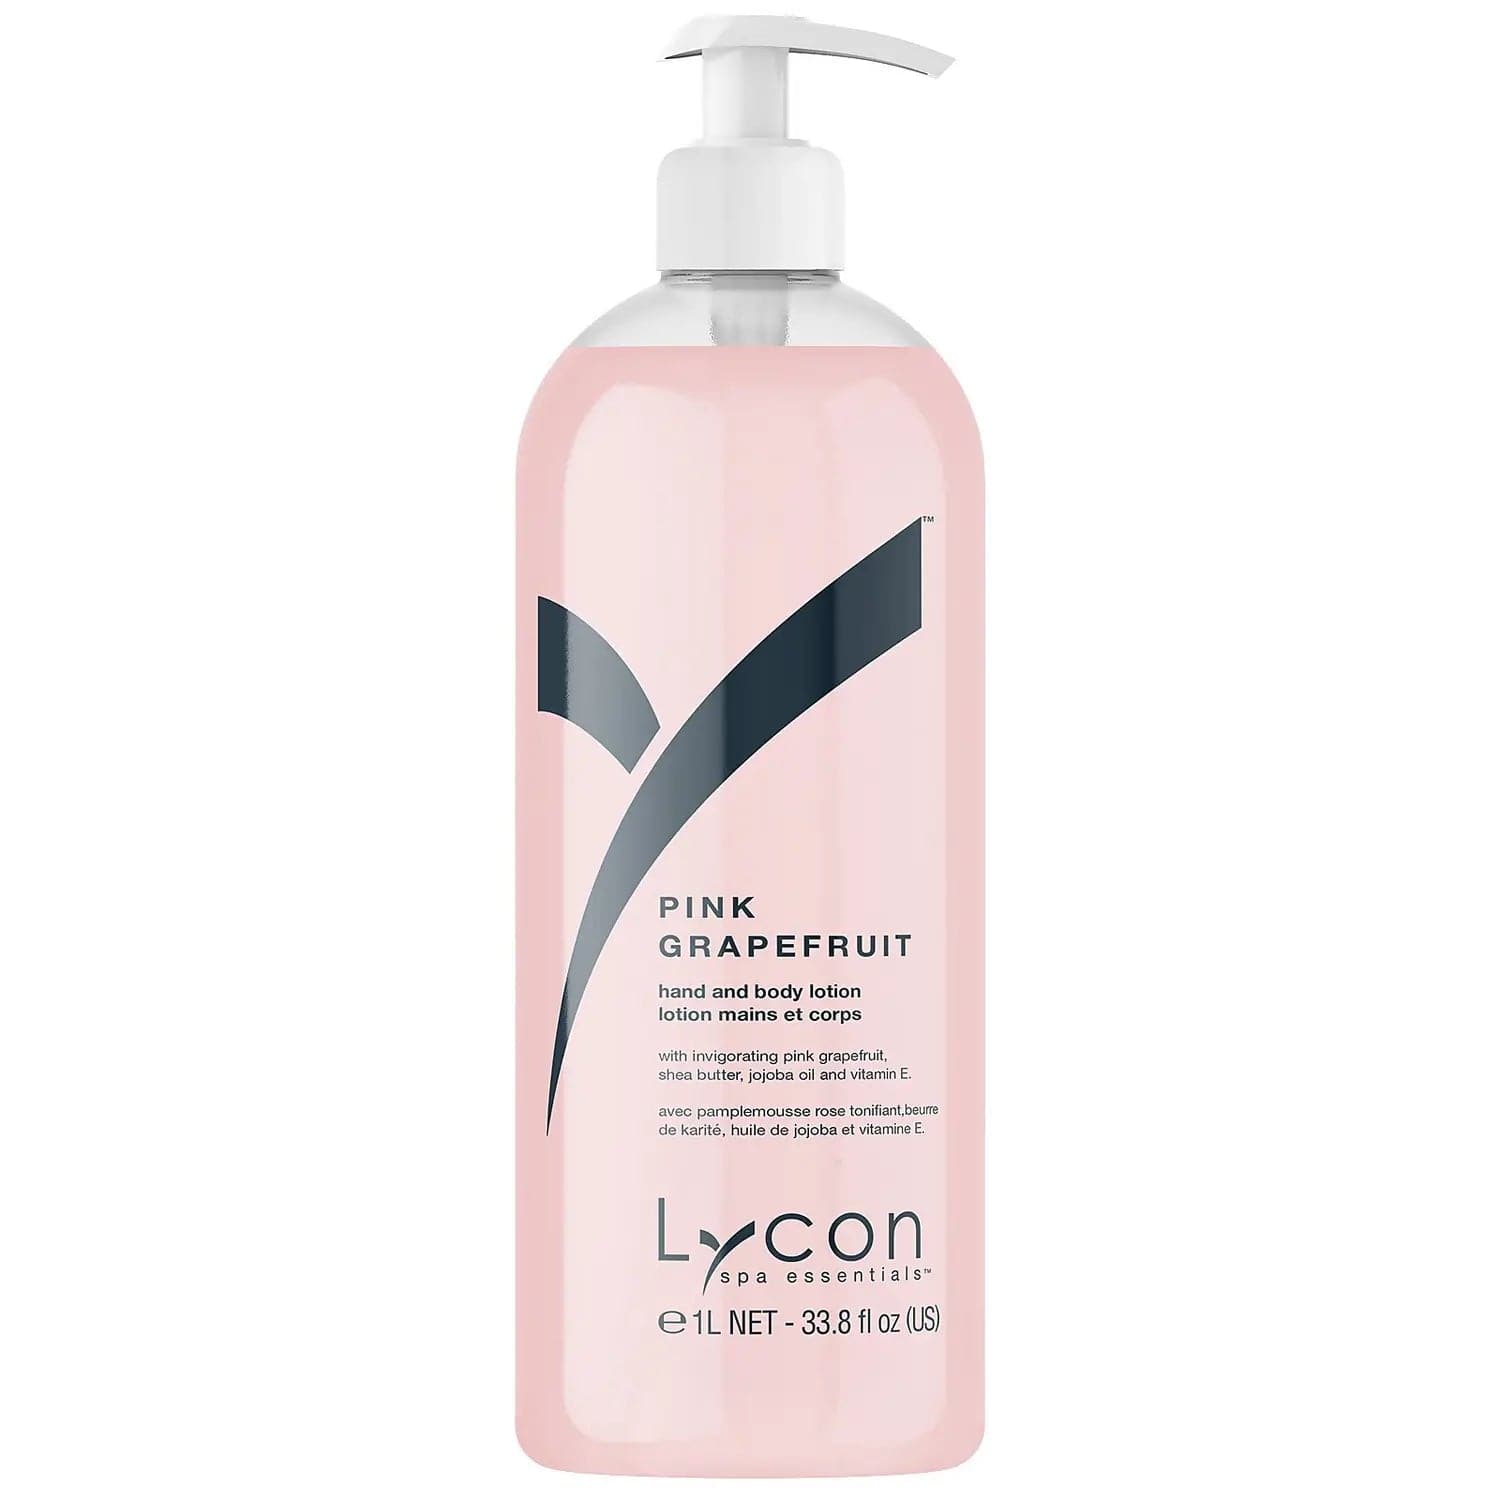 Pink Grapefruit Hand and Body Lotion 1L Beauty - Lycon - Luxe Pacifique